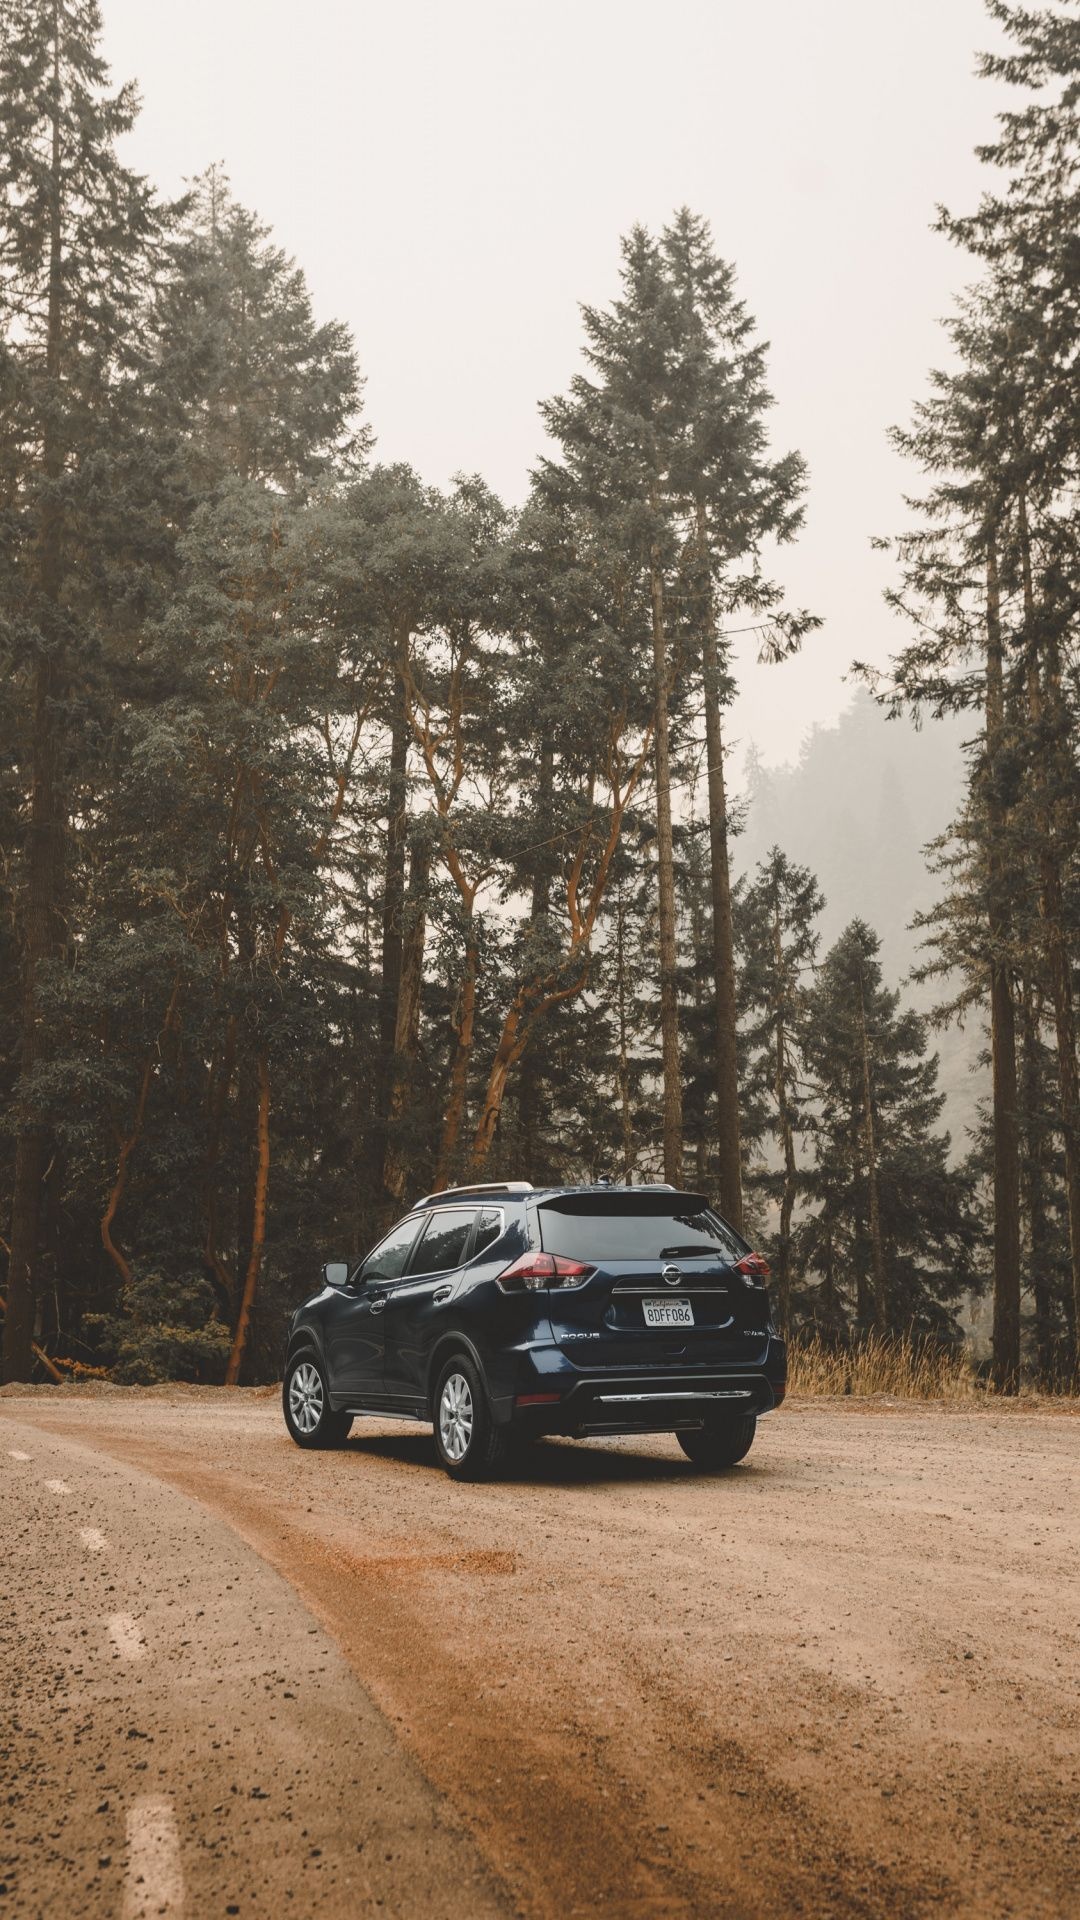 Nissan Rogue, Crossover car wallpapers, Nissan Rogue family car, Road trip, 1080x1920 Full HD Phone